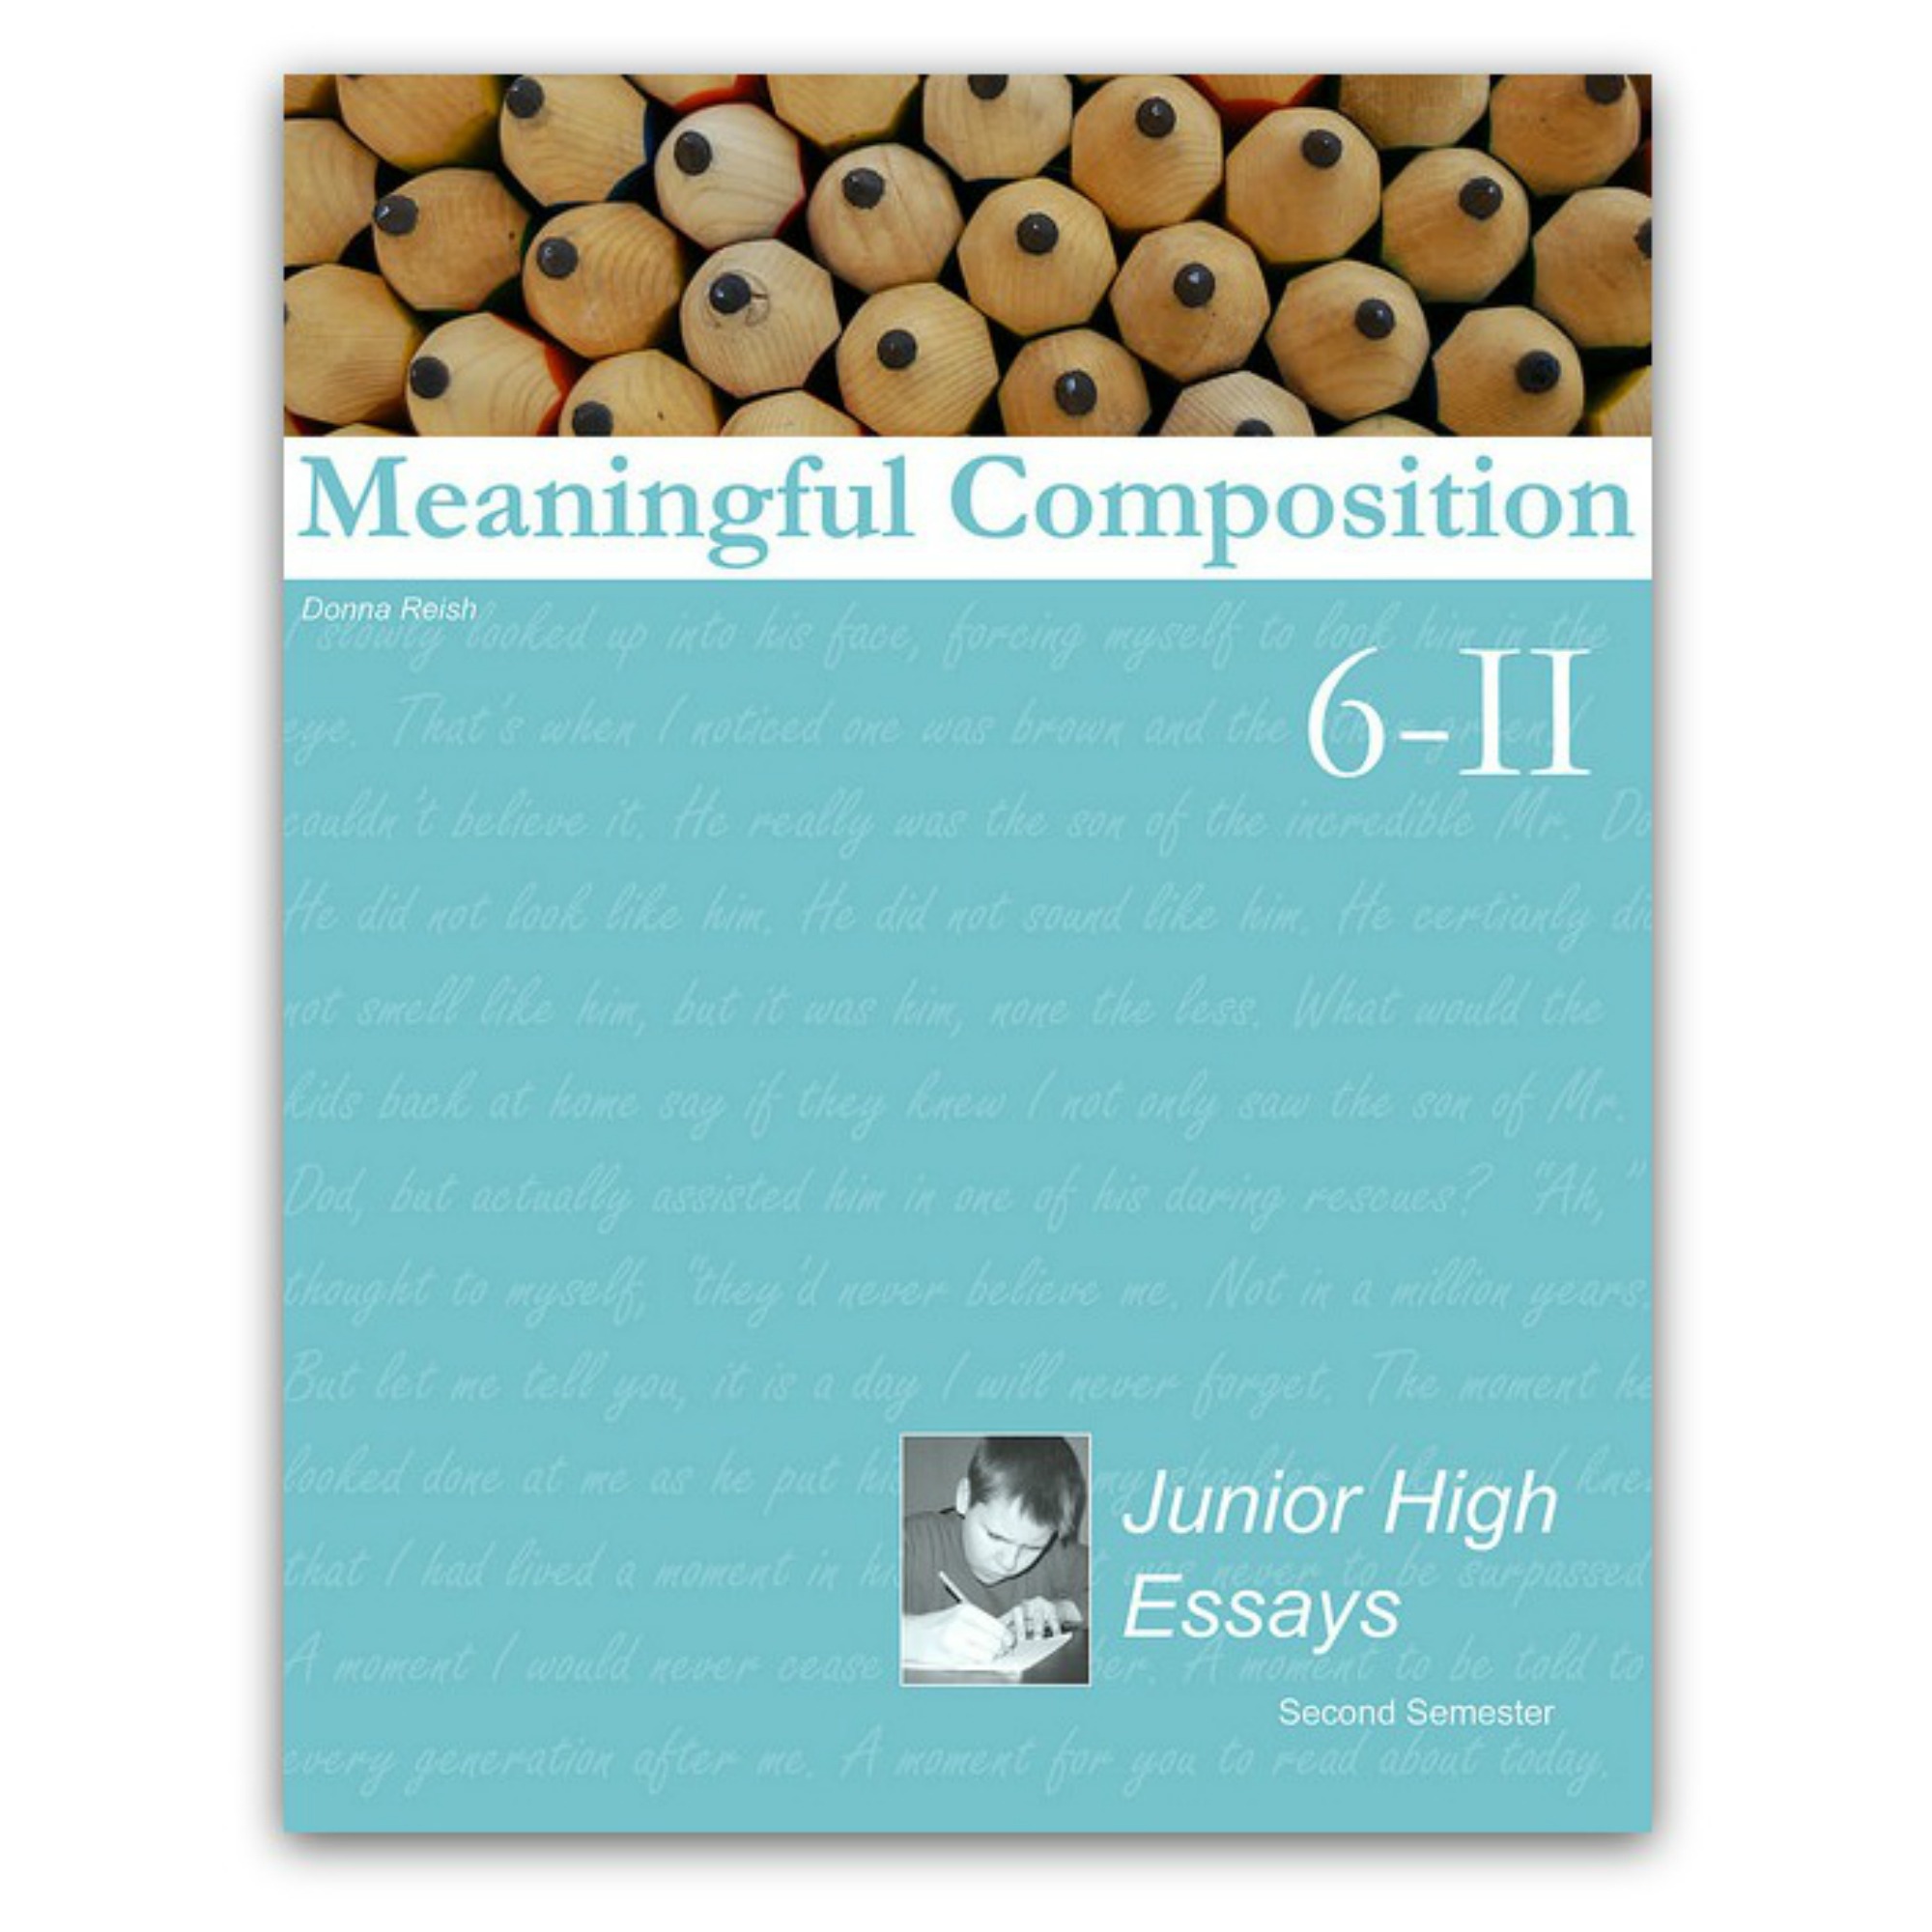 Meaningful Composition 6-II: Junior High Essays